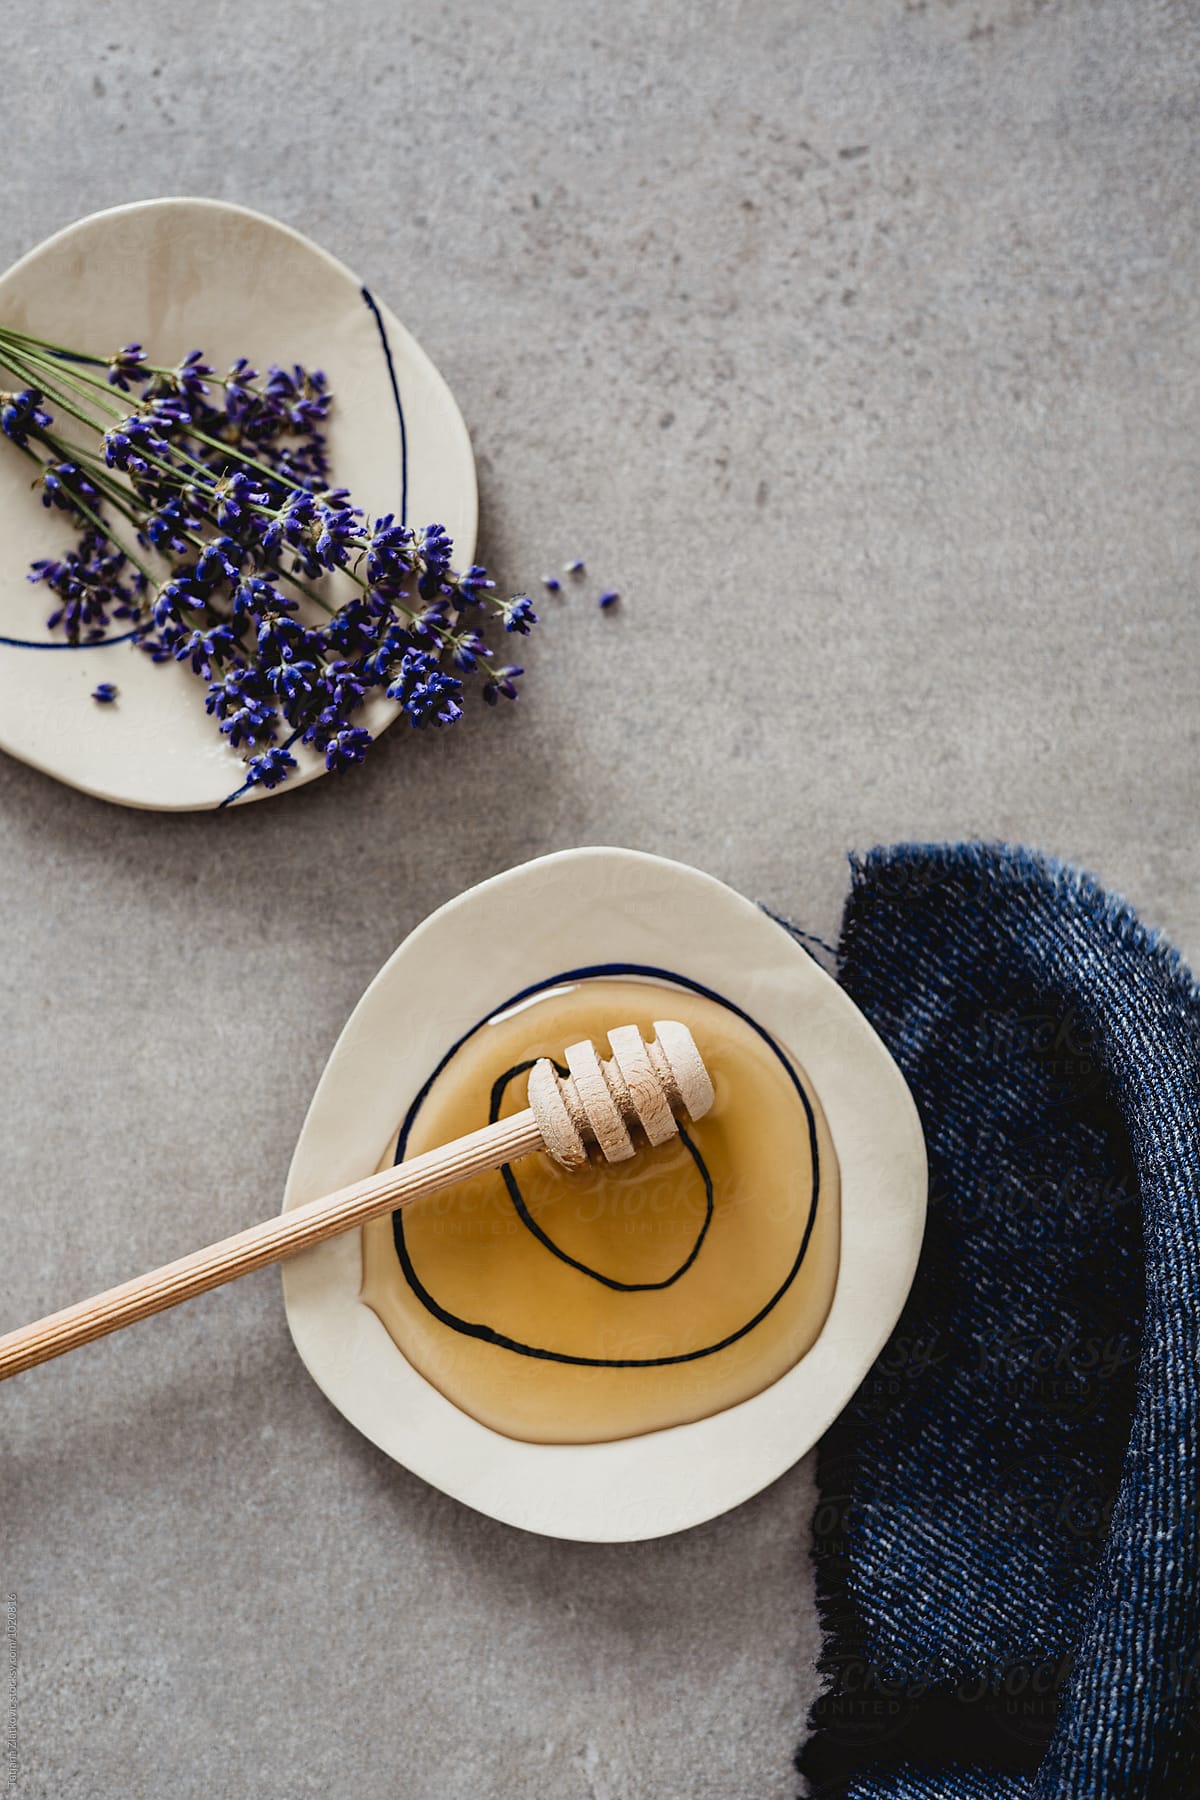 Artistic ceramic plates with honey and lavender